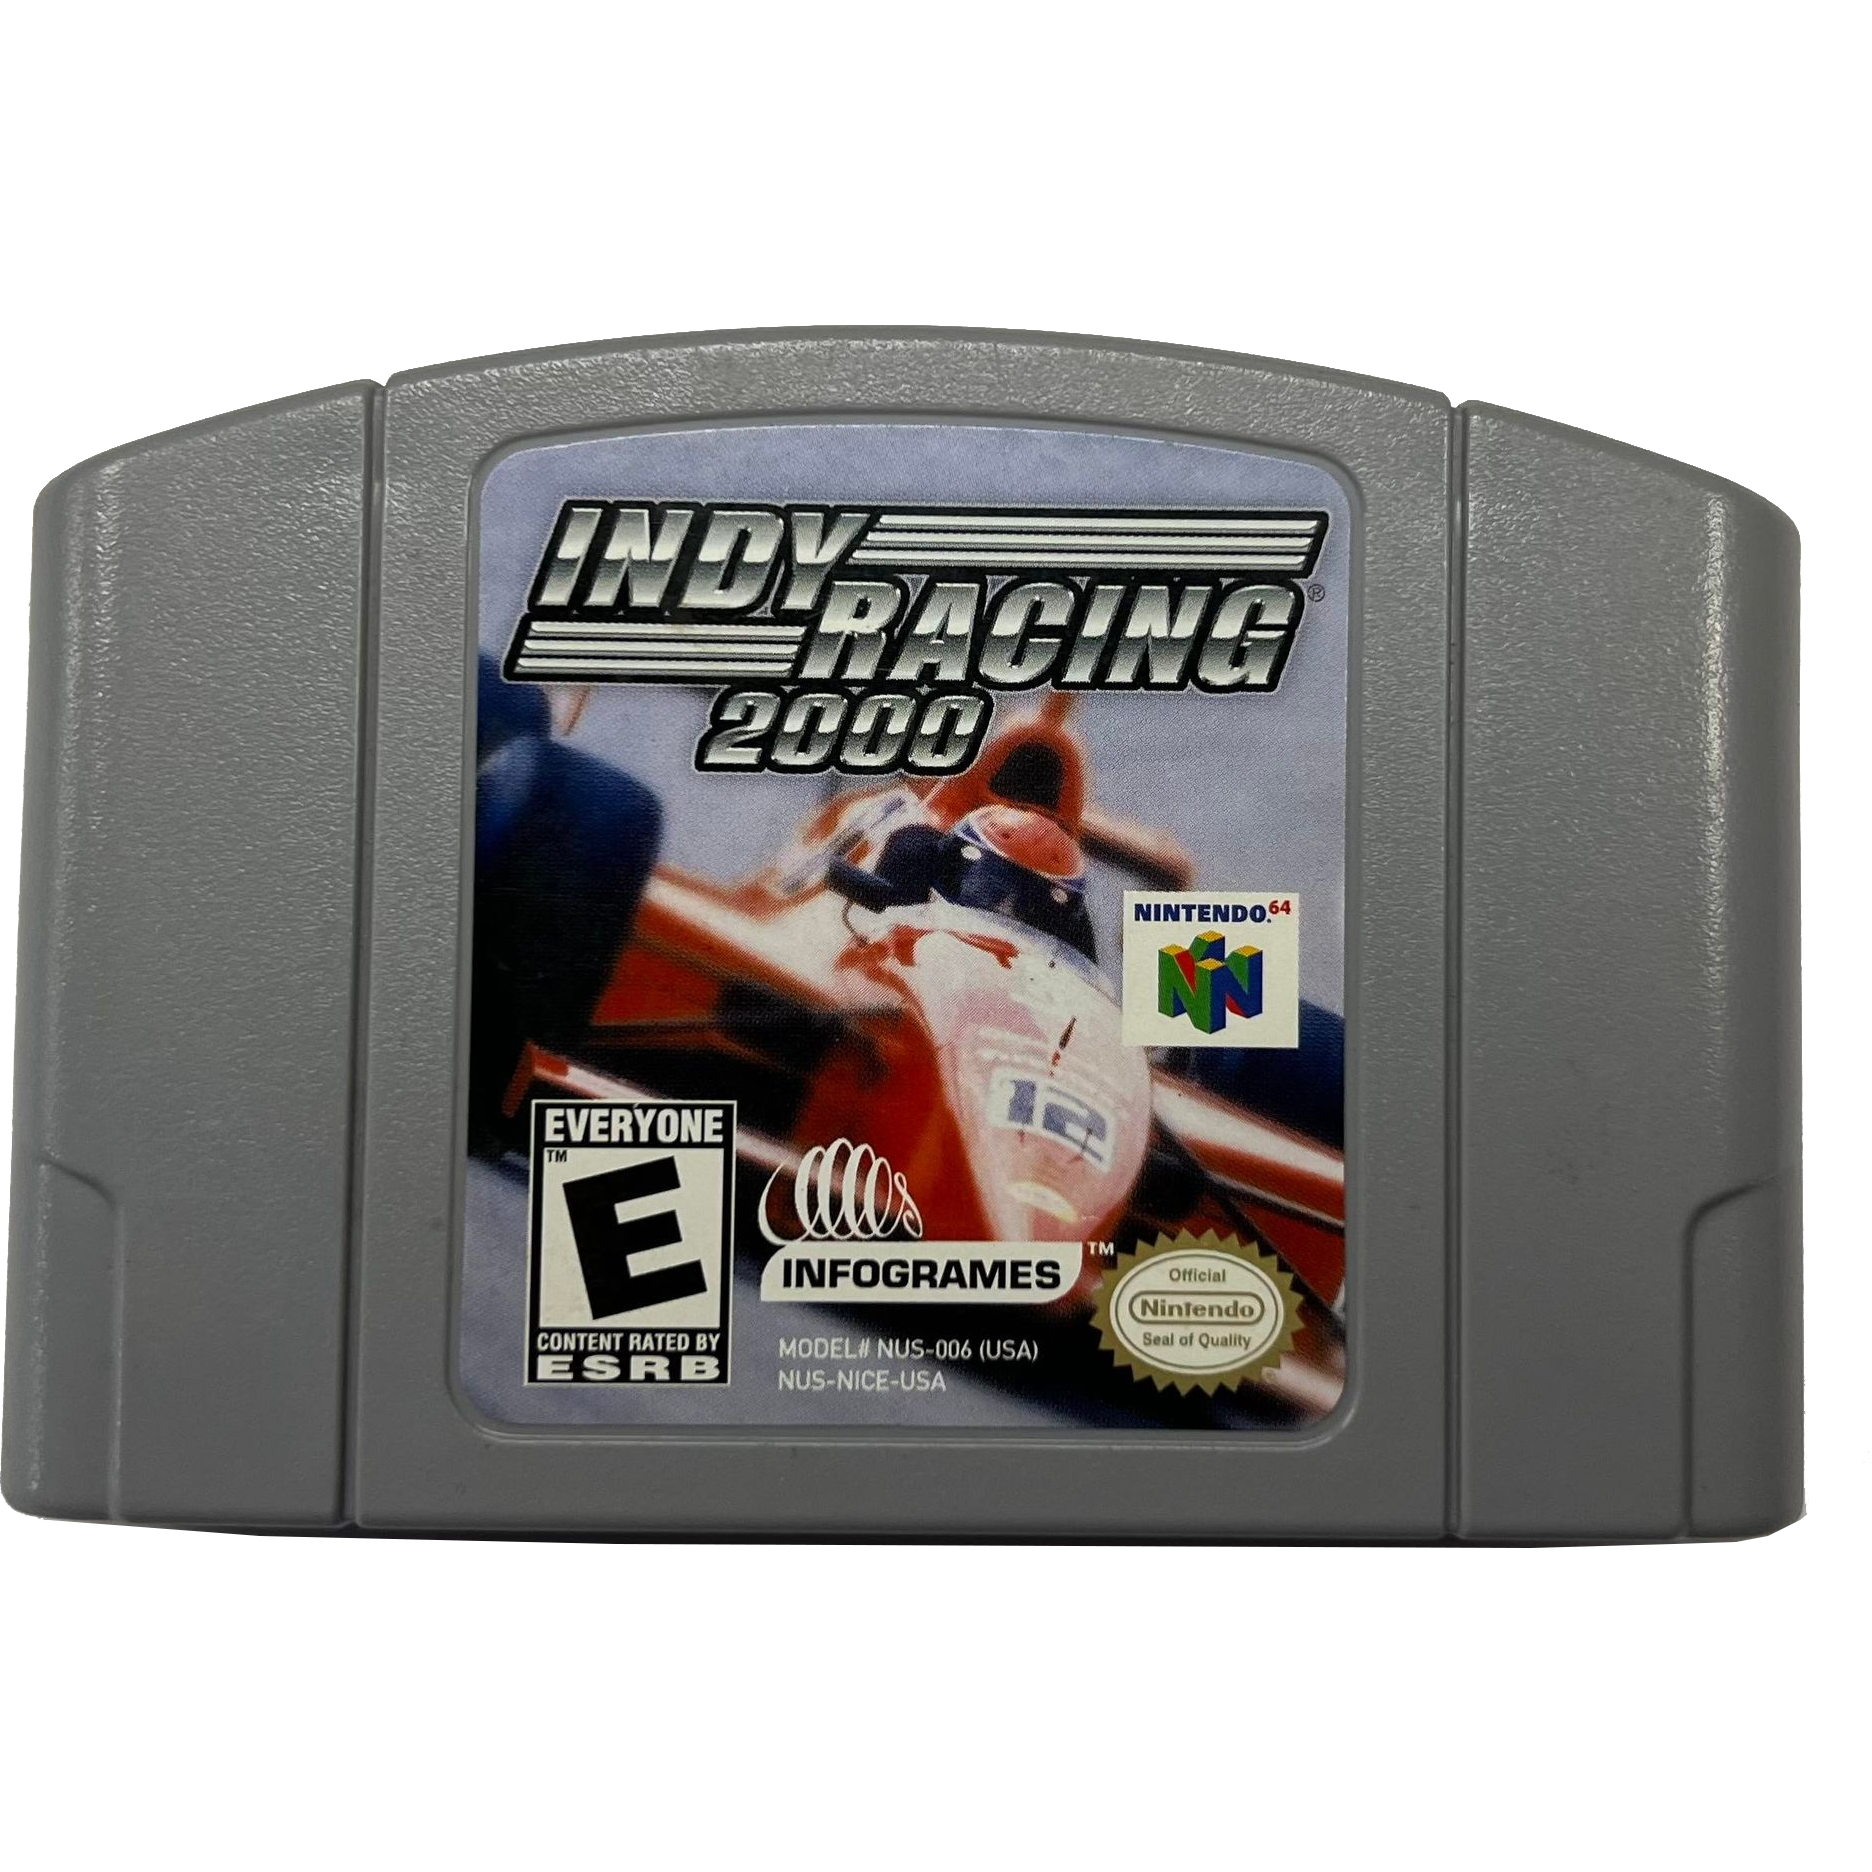 N64 - Indy Racing 2000 (Cartridge Only)